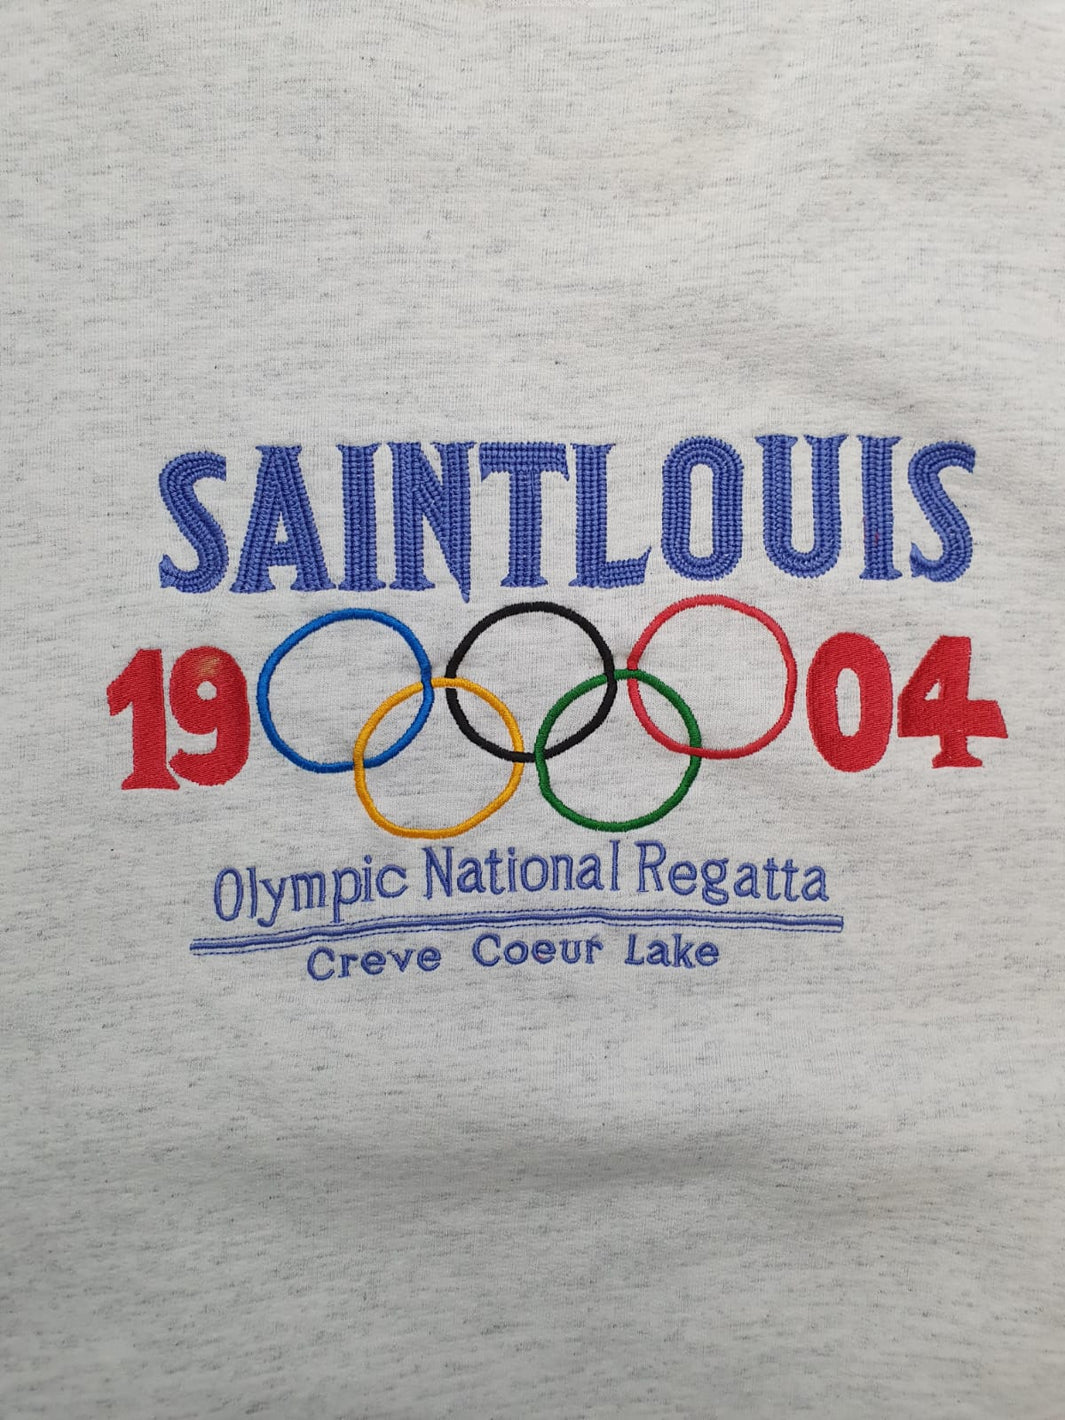 Adidas Olympia Sweater St.Louis 1904